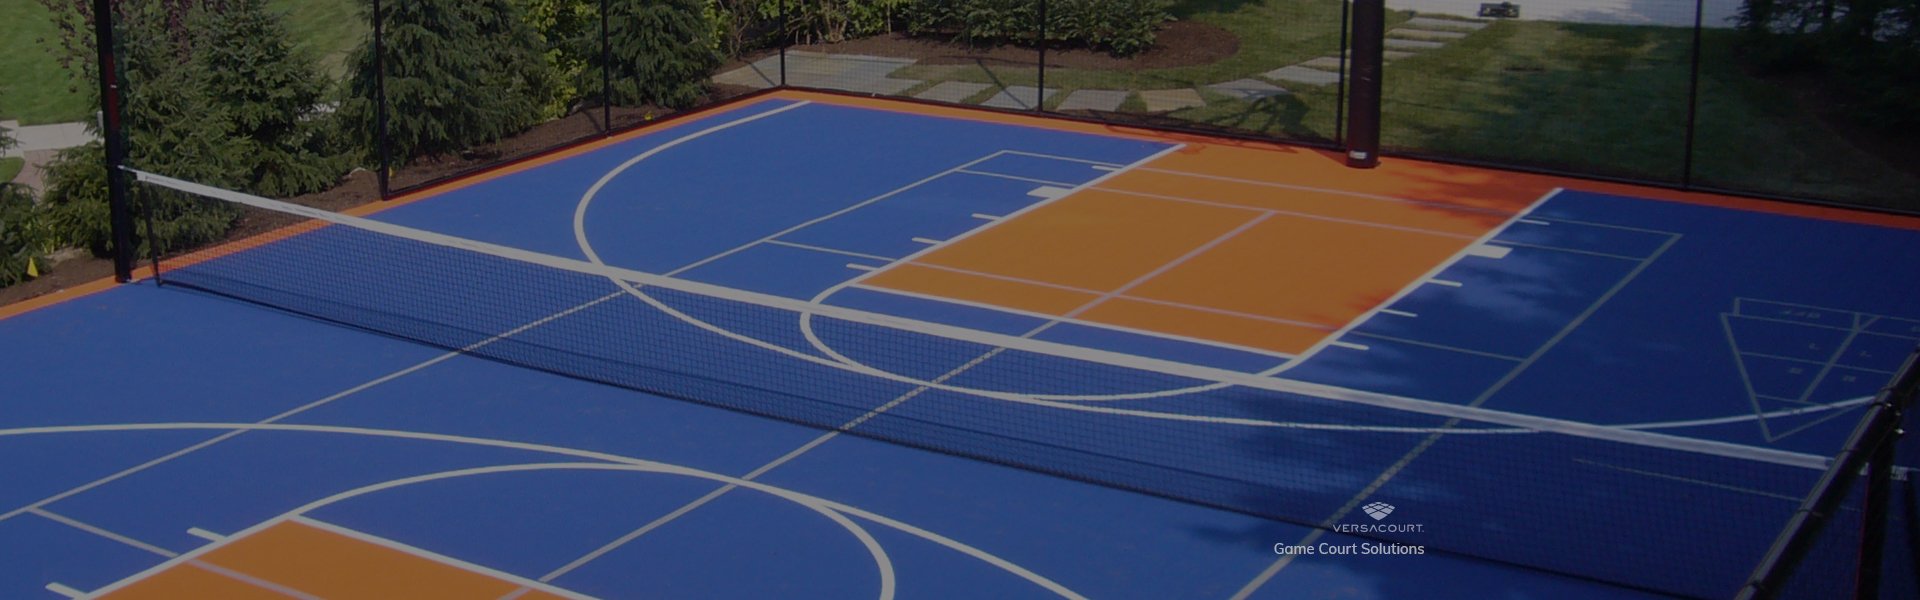 Innovative Backyard Game Court Solutions